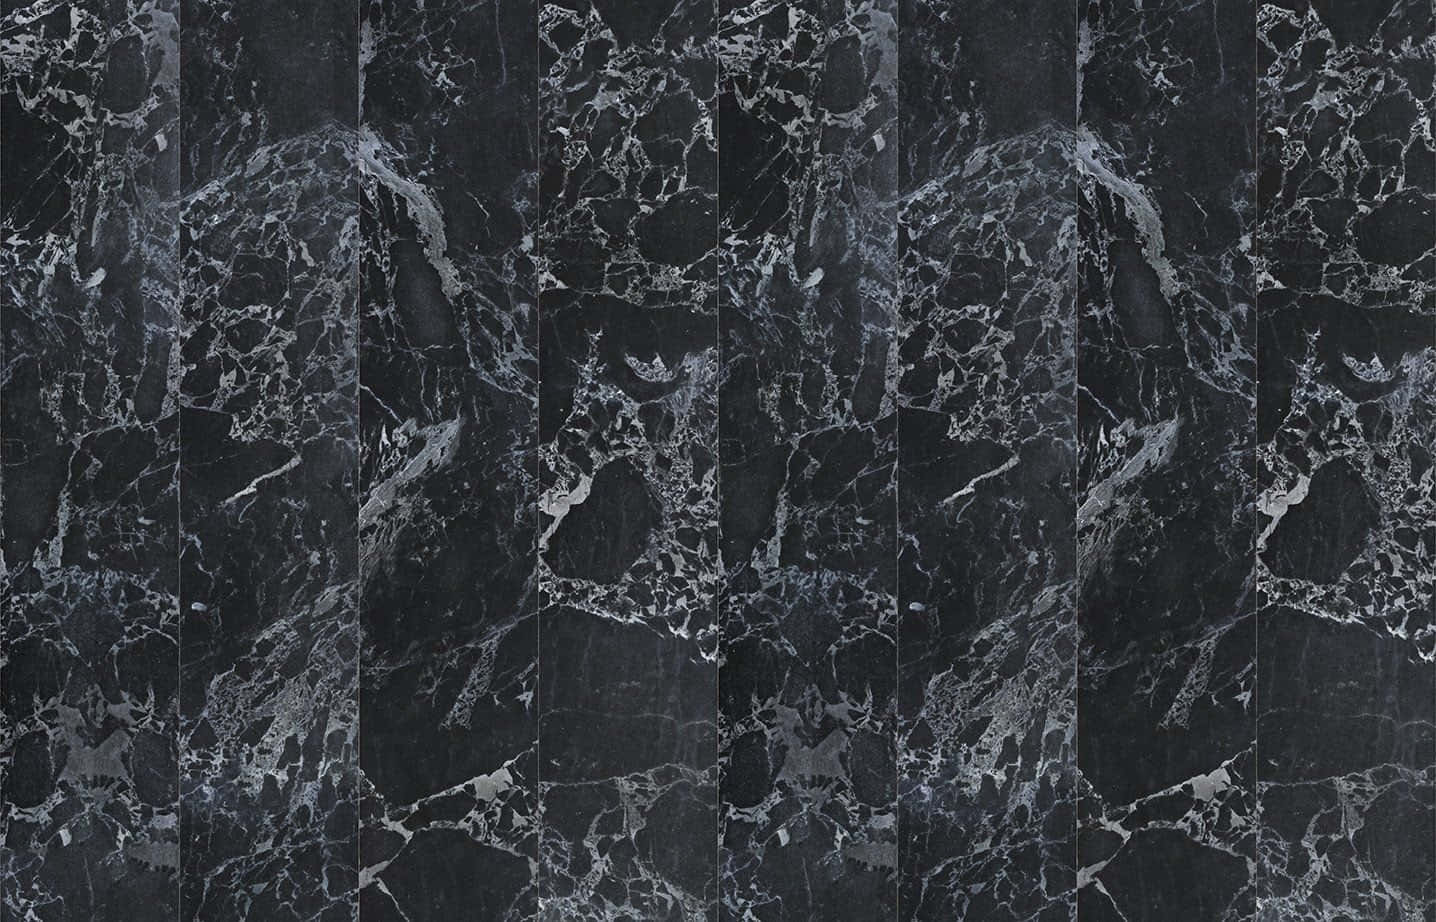 Sumptuous black and white marble pattern.